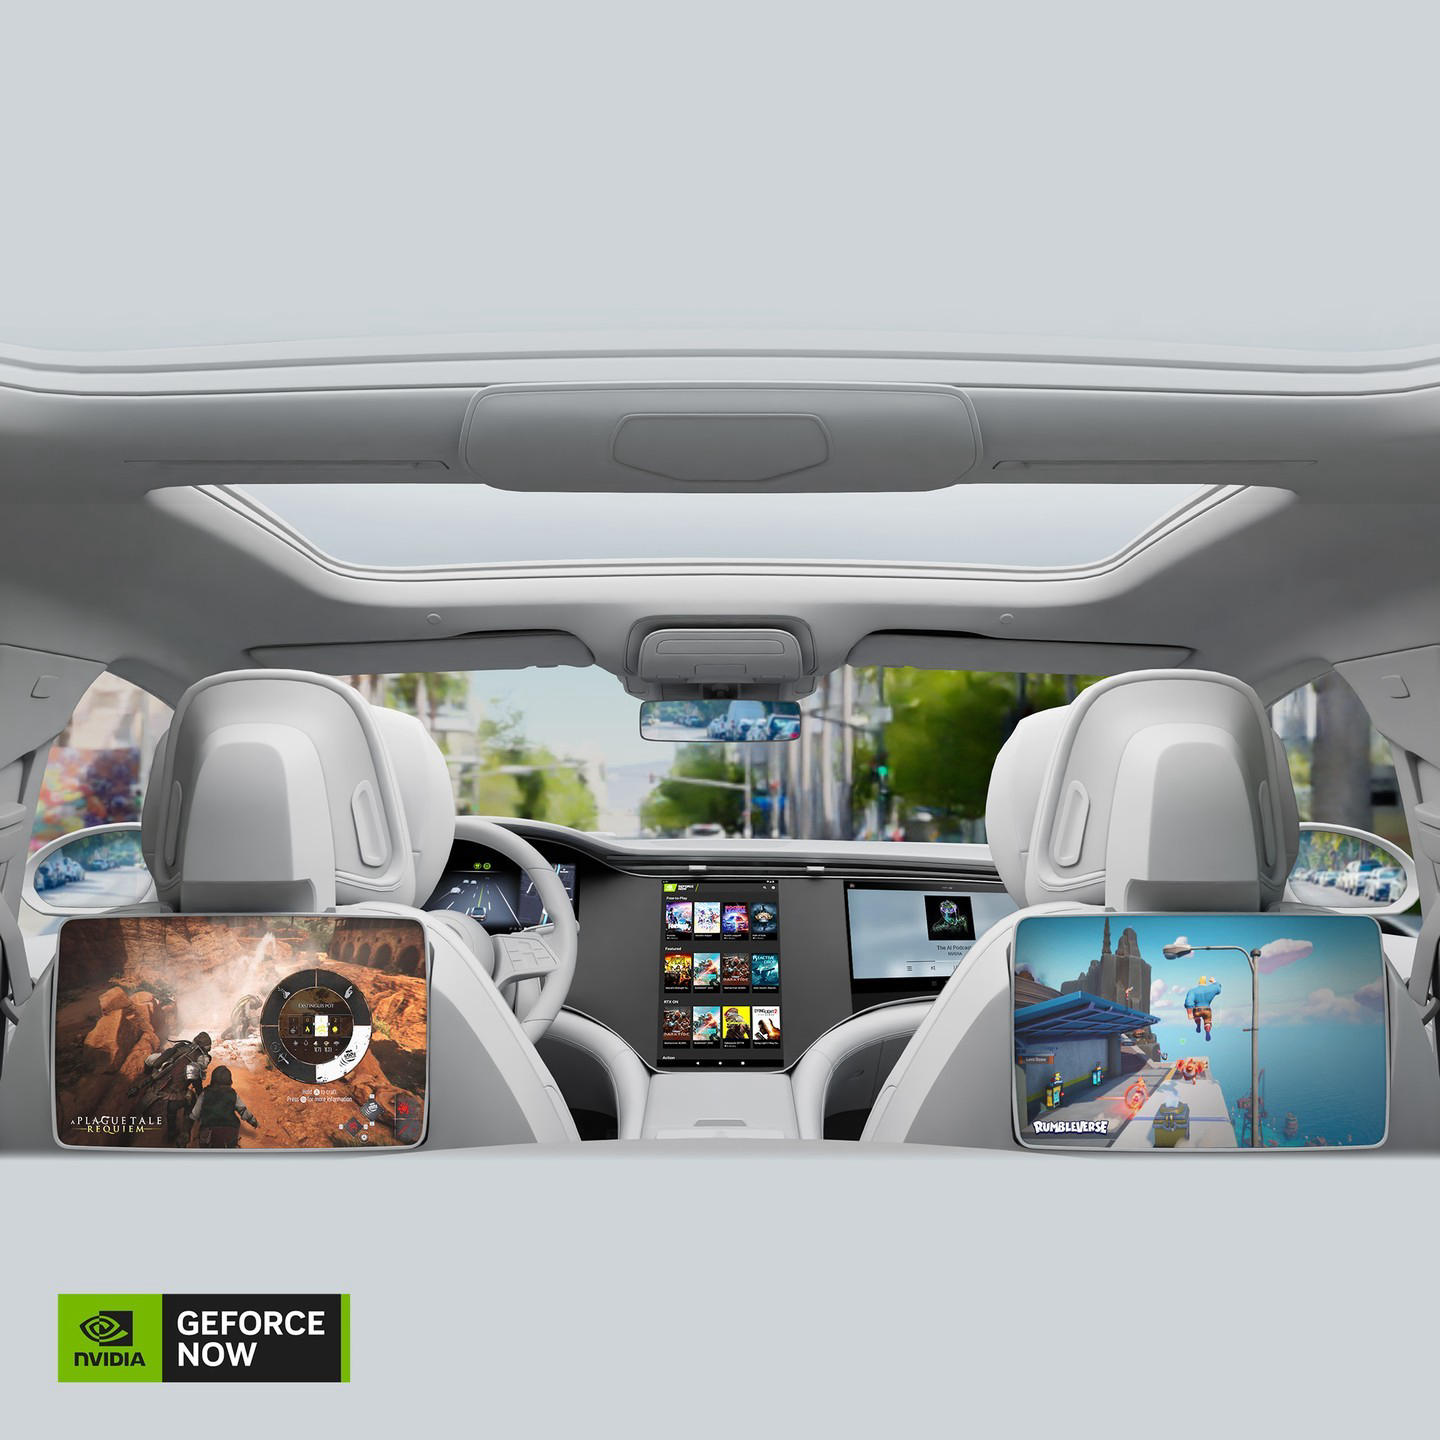 image  1 NVIDIA - Riding in a car has never been more entertaining